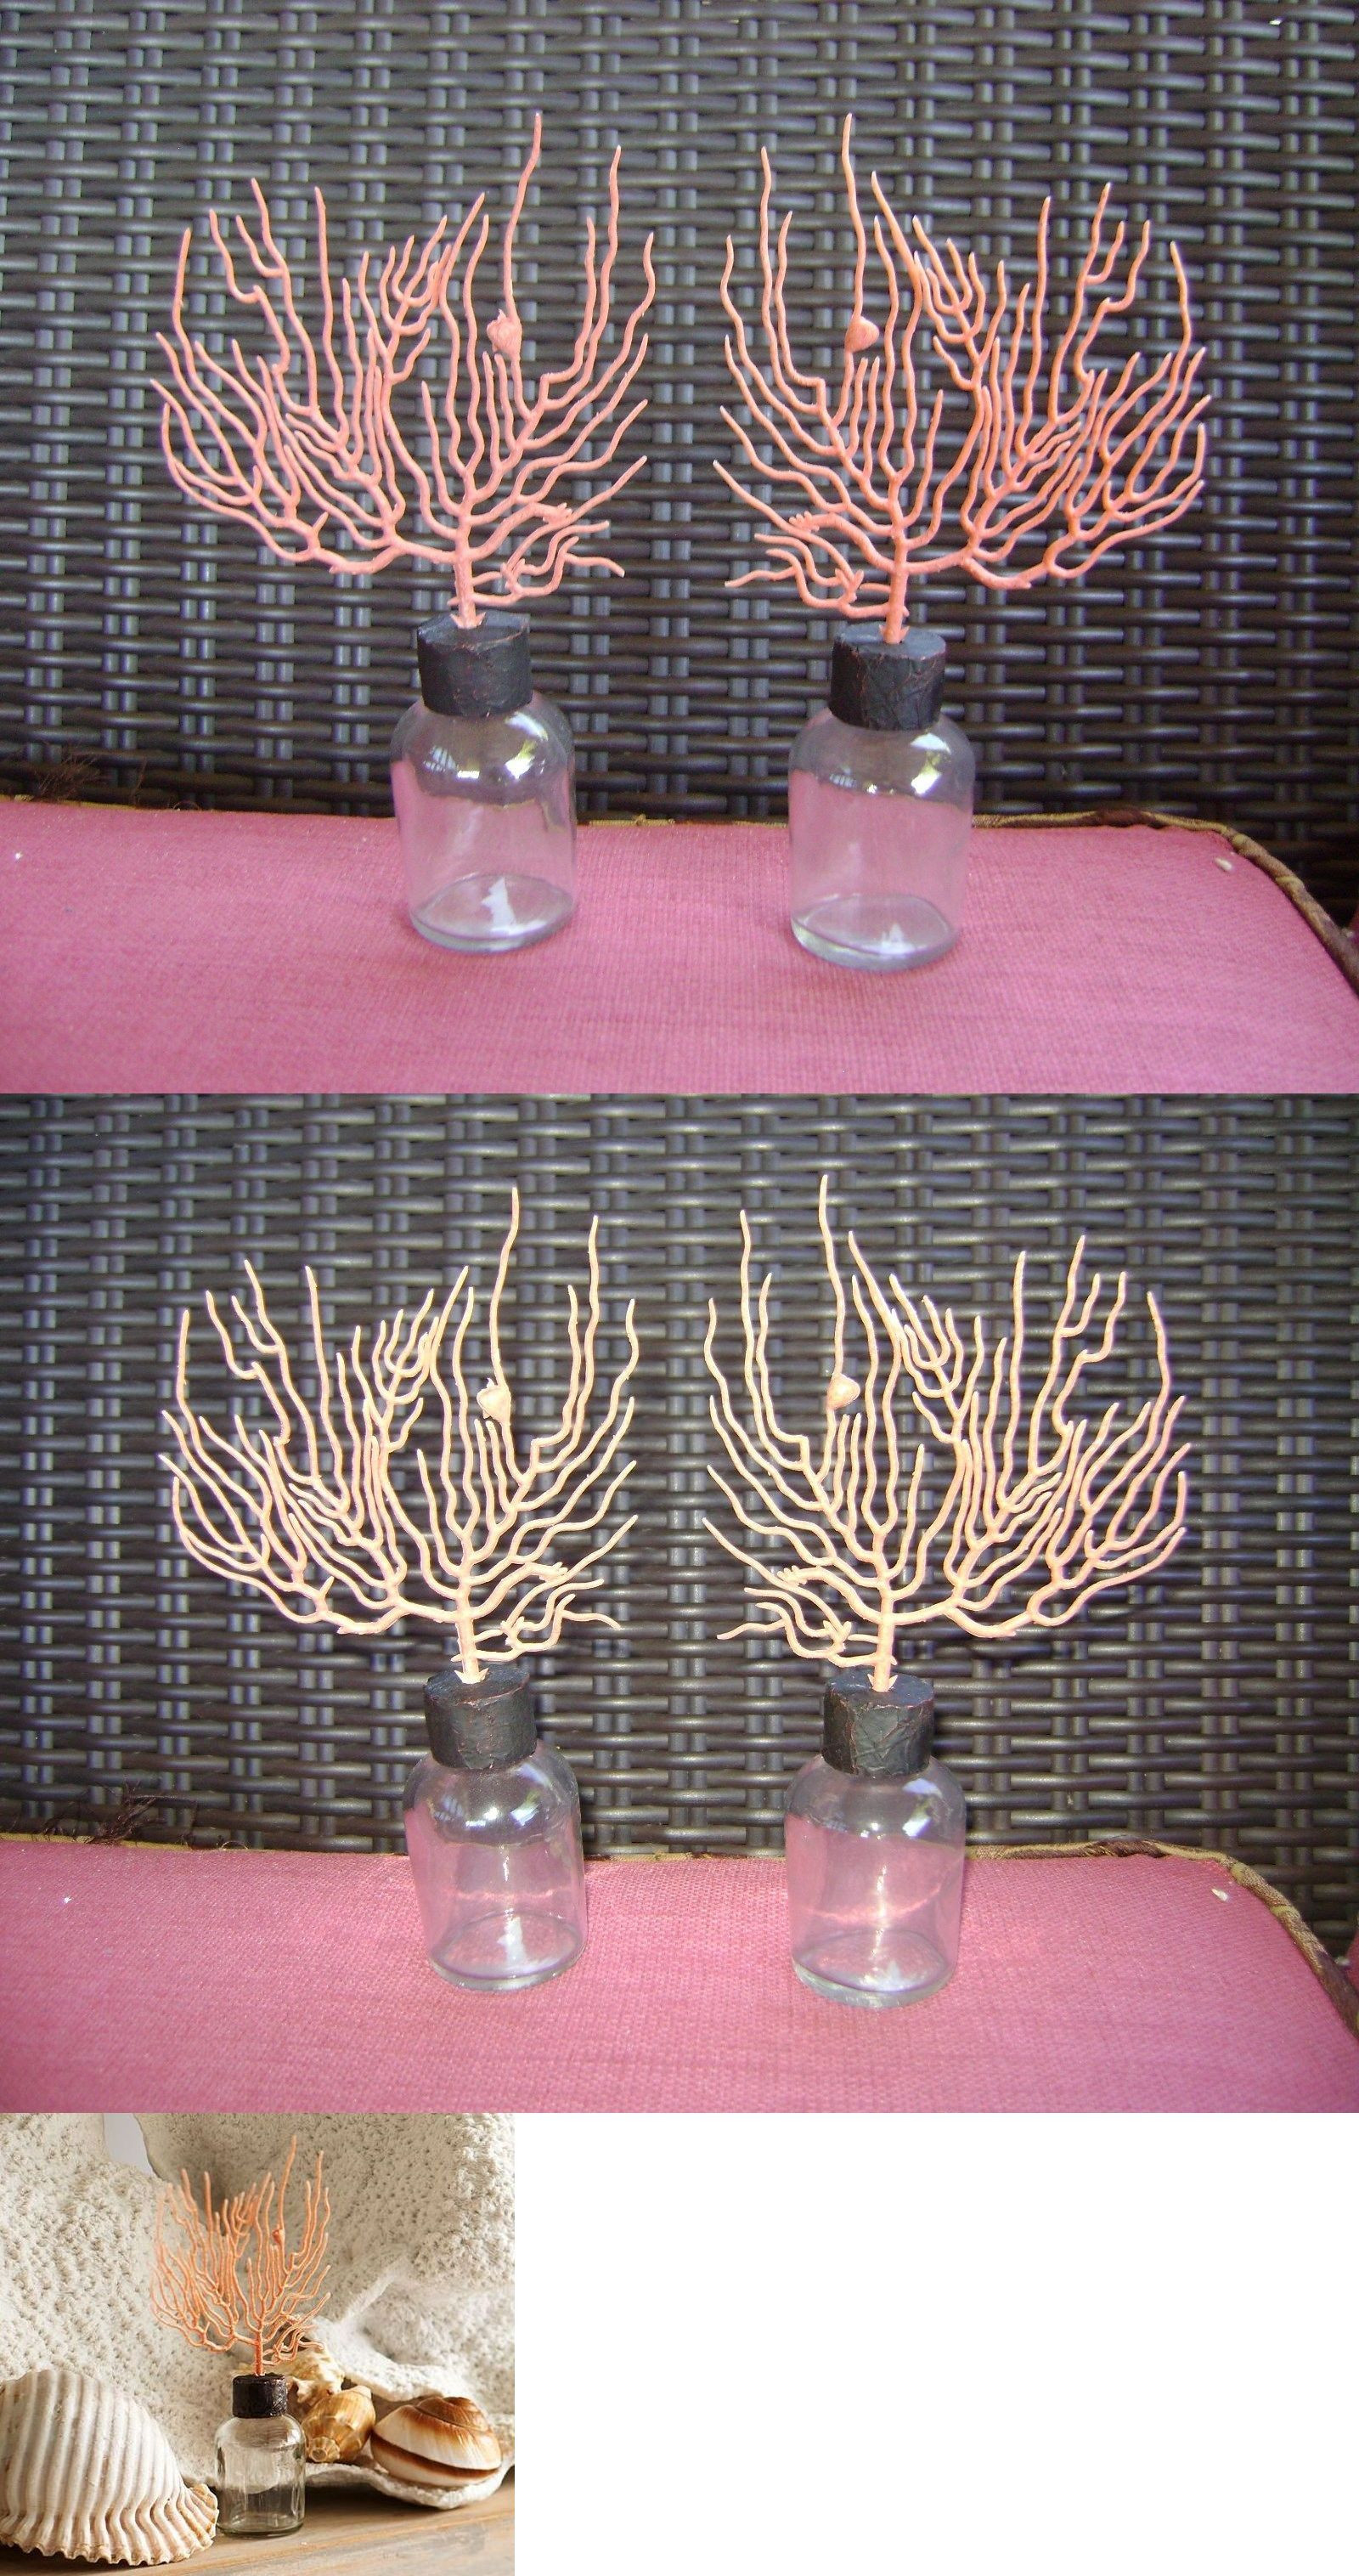 pottery barn bud vases of bottles 36016 pottery barn coral topped bottles set 2 great with inside bottles 36016 pottery barn coral topped bottles set 2 great with coral embroidered quilt